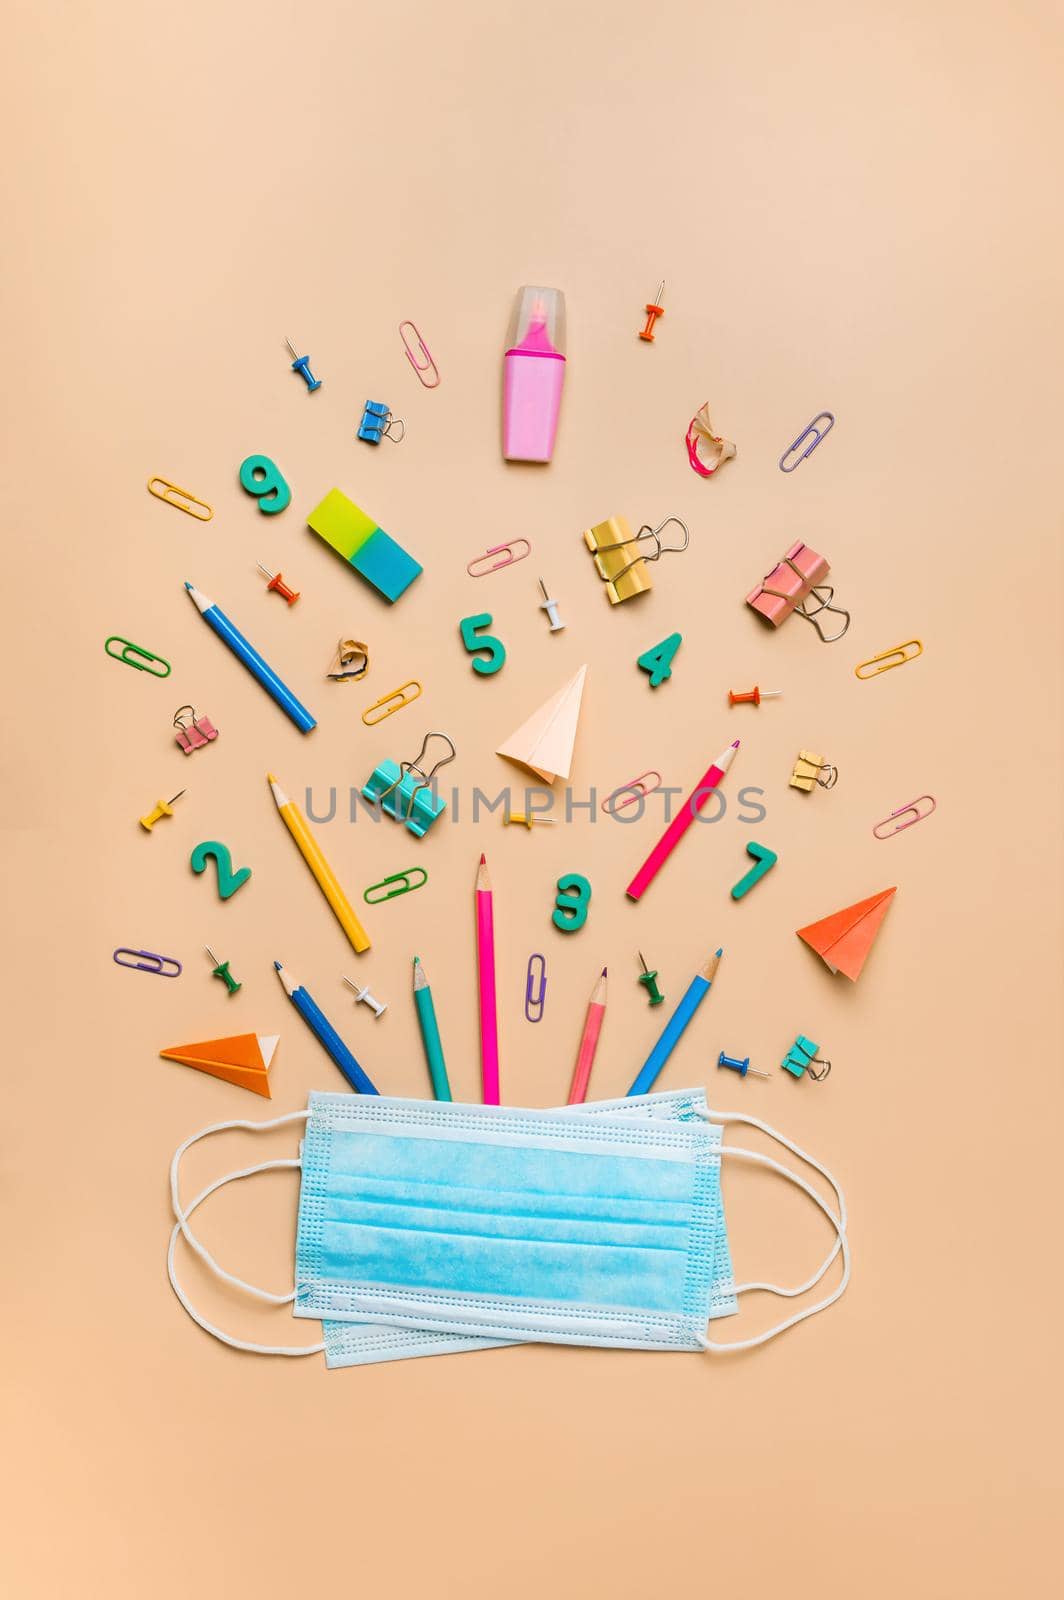 Protective medical mask on creative student desk with colorful modern school supplies on neutral pastel beige background. Top view. Flat lay. Back to school covid19 concept. Vertical